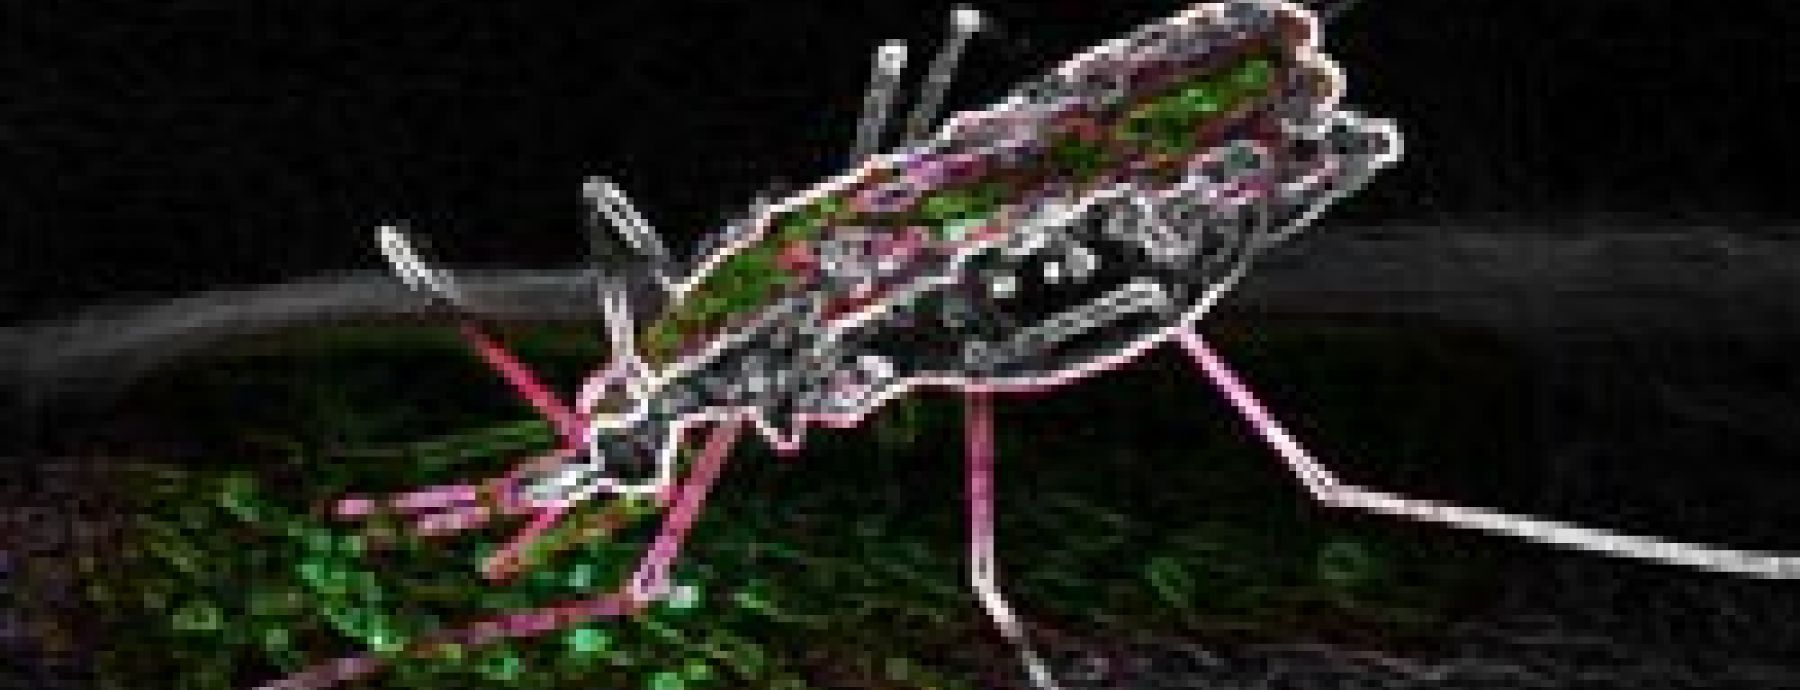 Daily temperature fluctuations affect malaria transmission potential